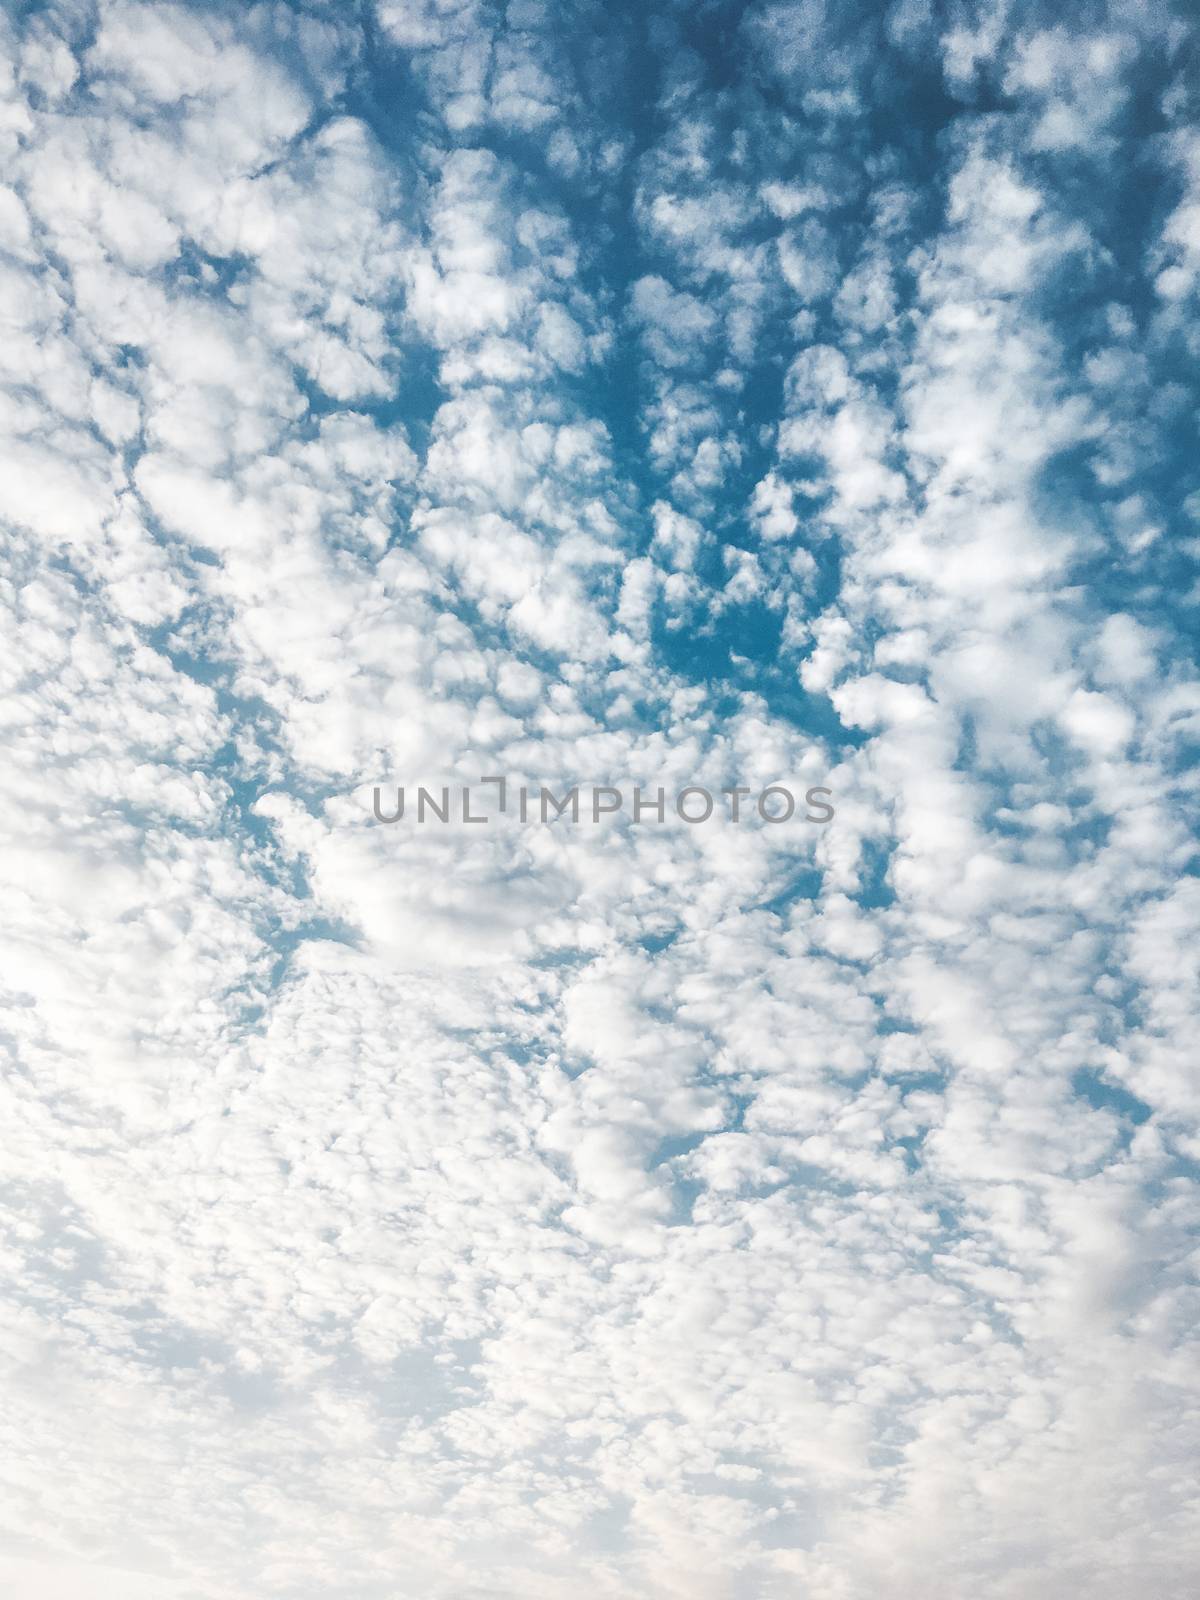 Cloudscape on blue sky. Outdoors abstract background with clouds.